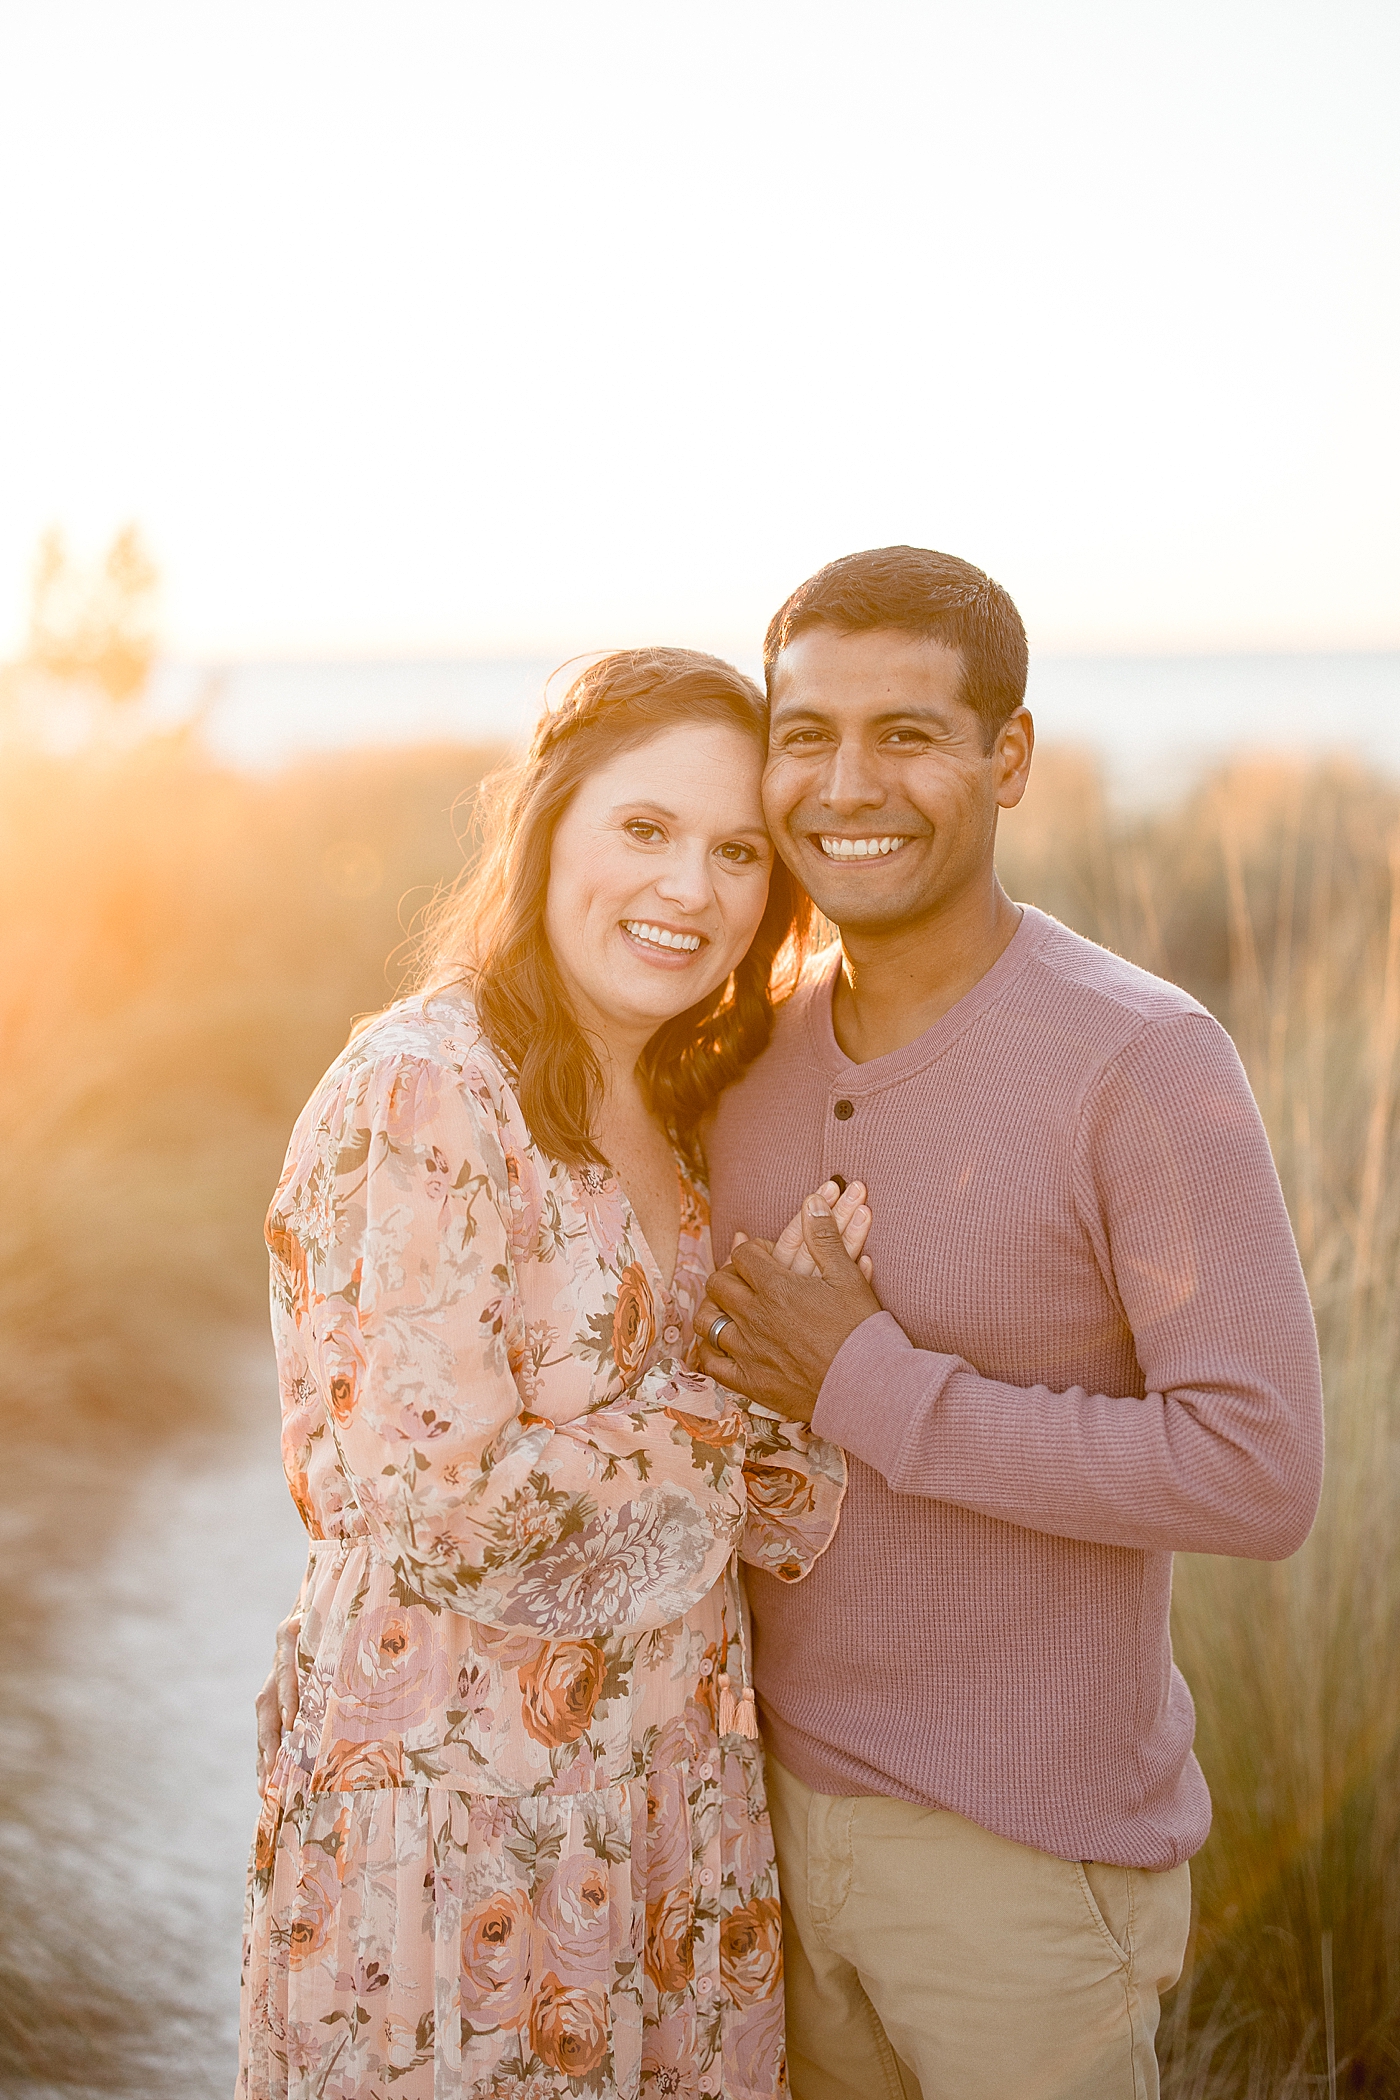 Couples photo at sunset at Cypress Point Park | Brittany Elise Photography